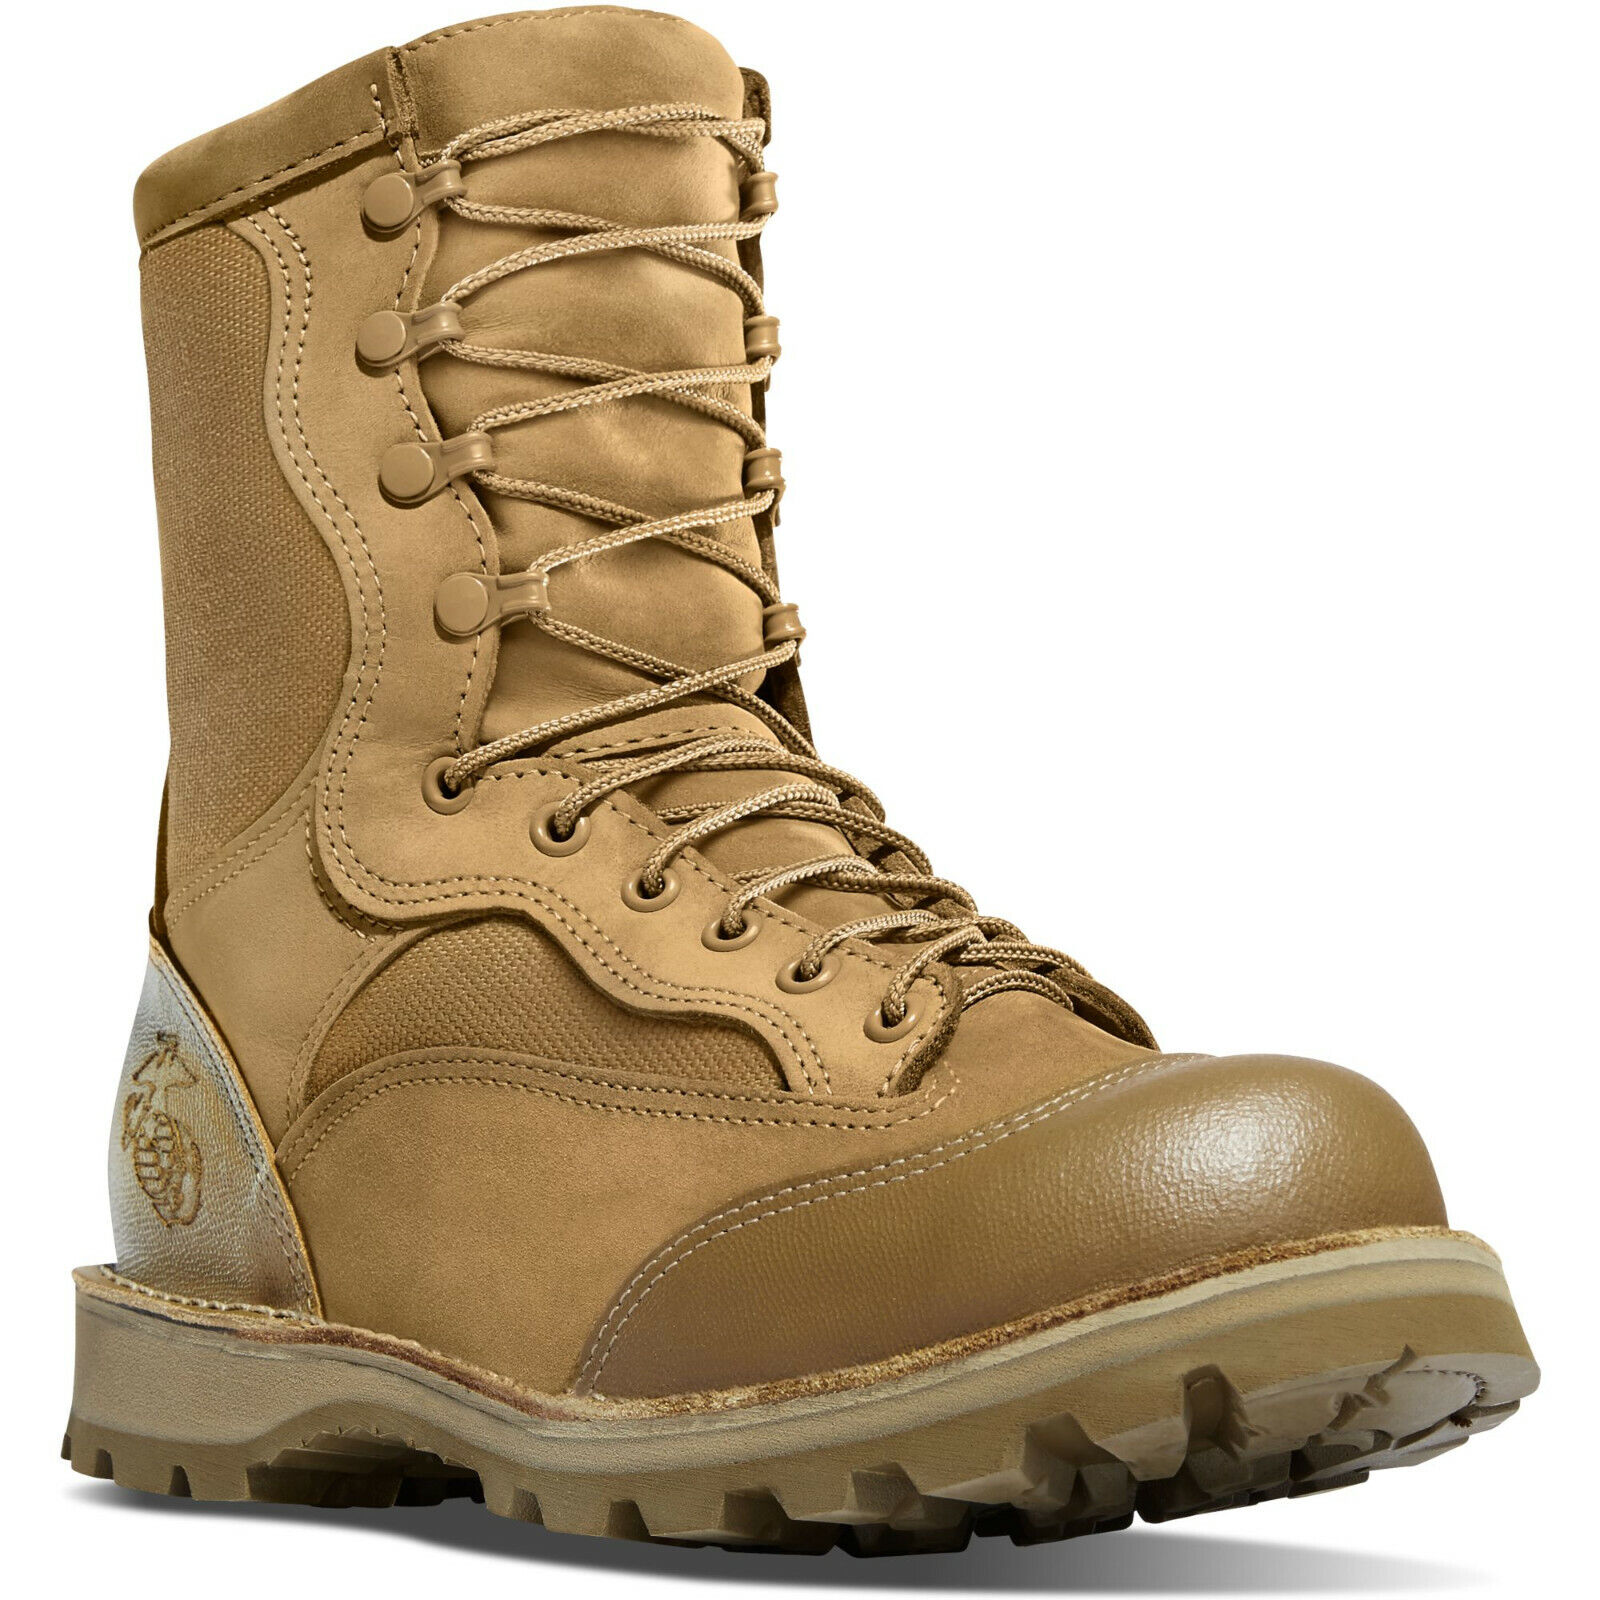 Danner USMC Military Boots Size: 15 Regular NSN: 8430-01-591-3012 Hot Weather